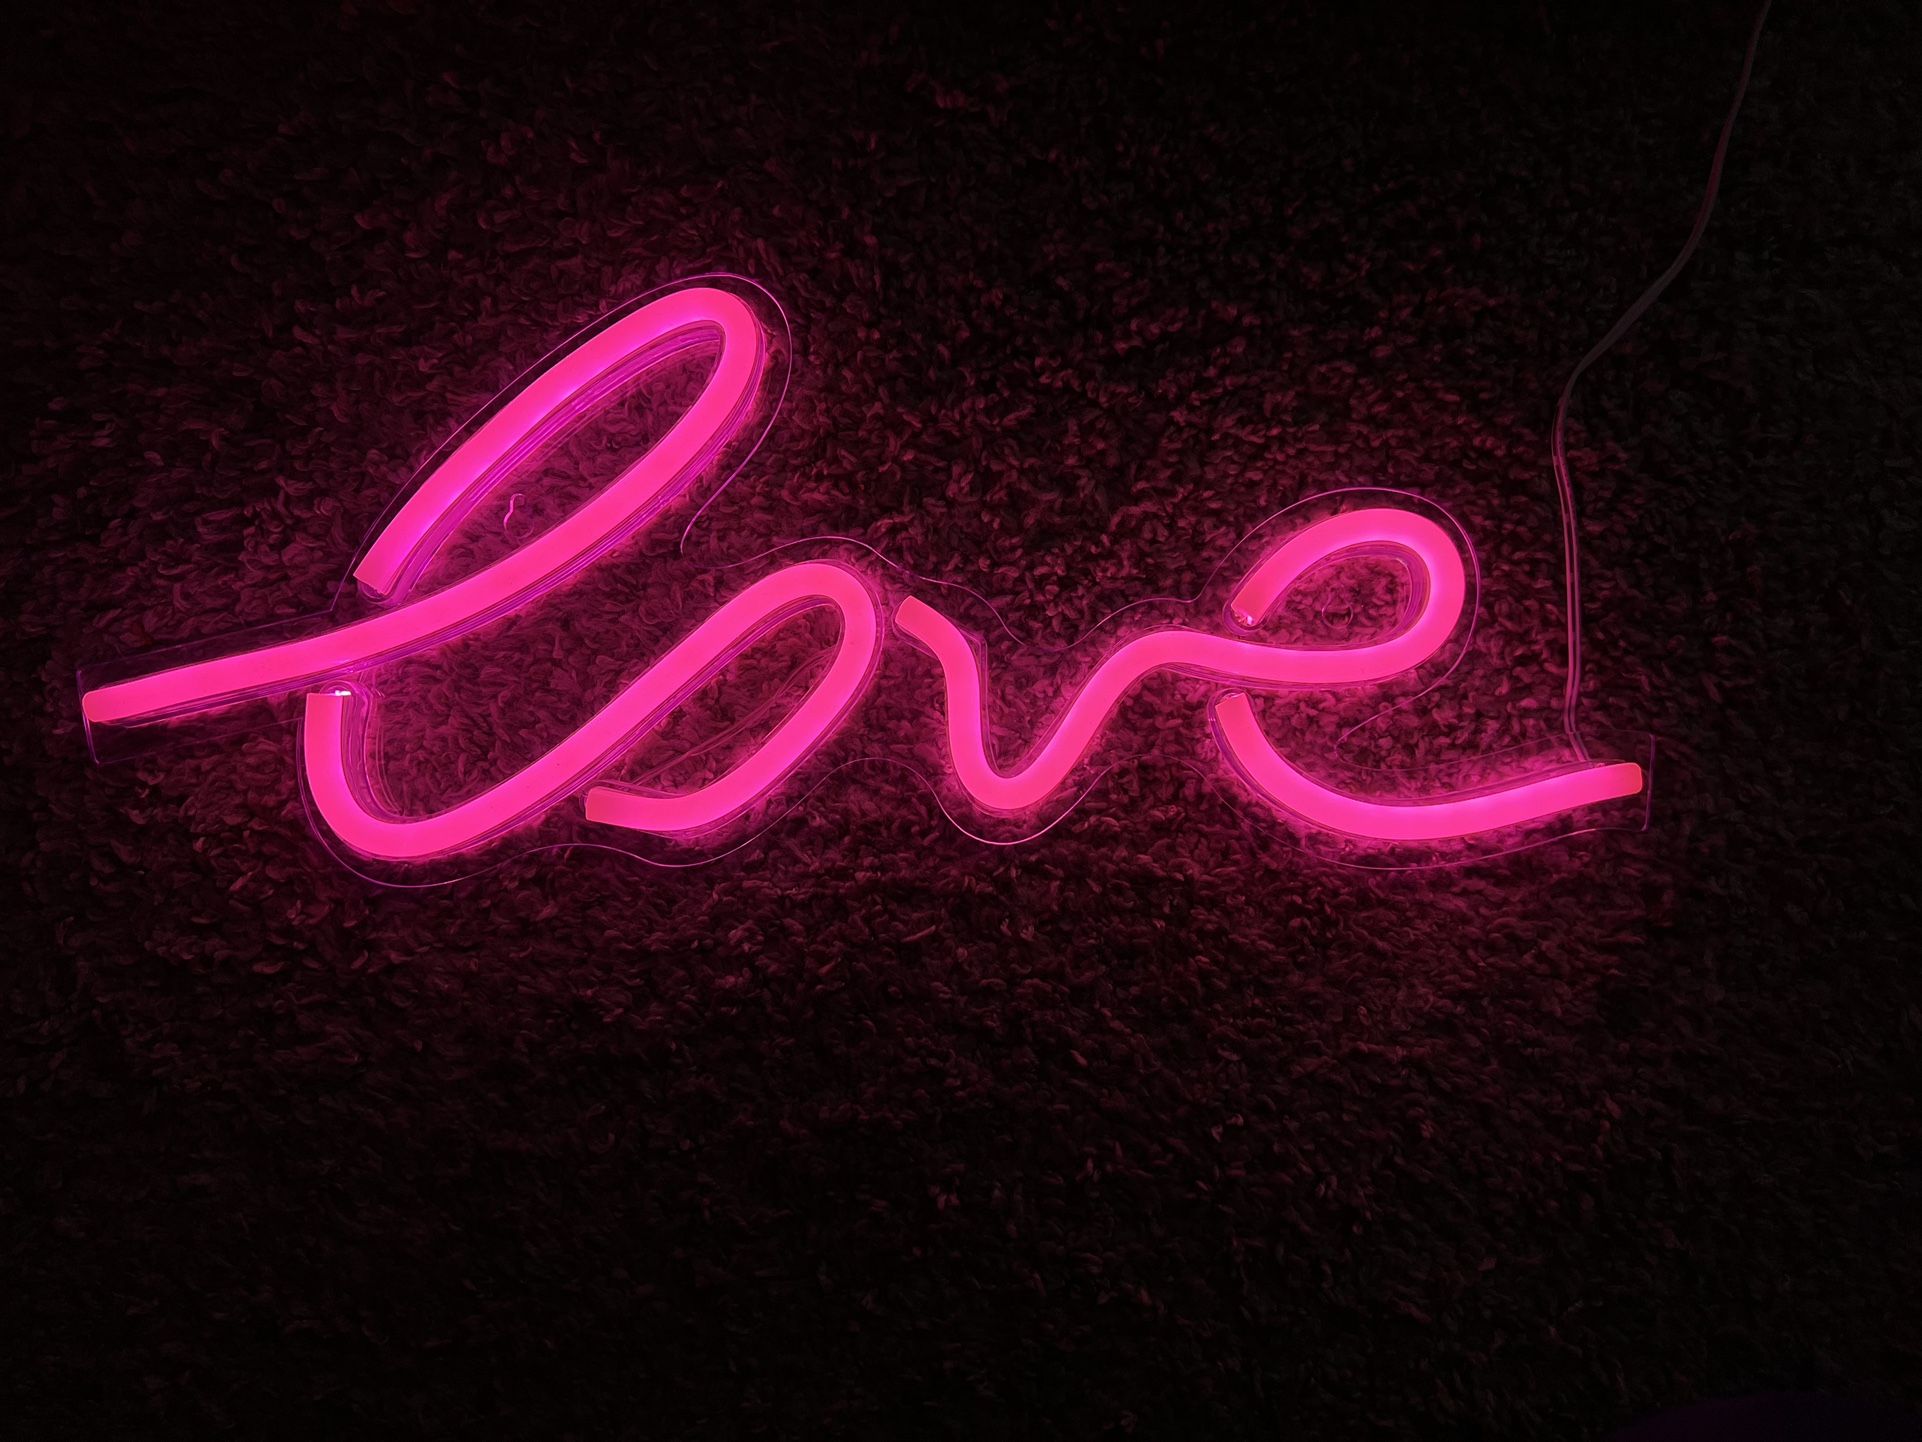 Led Love sign with USB Power